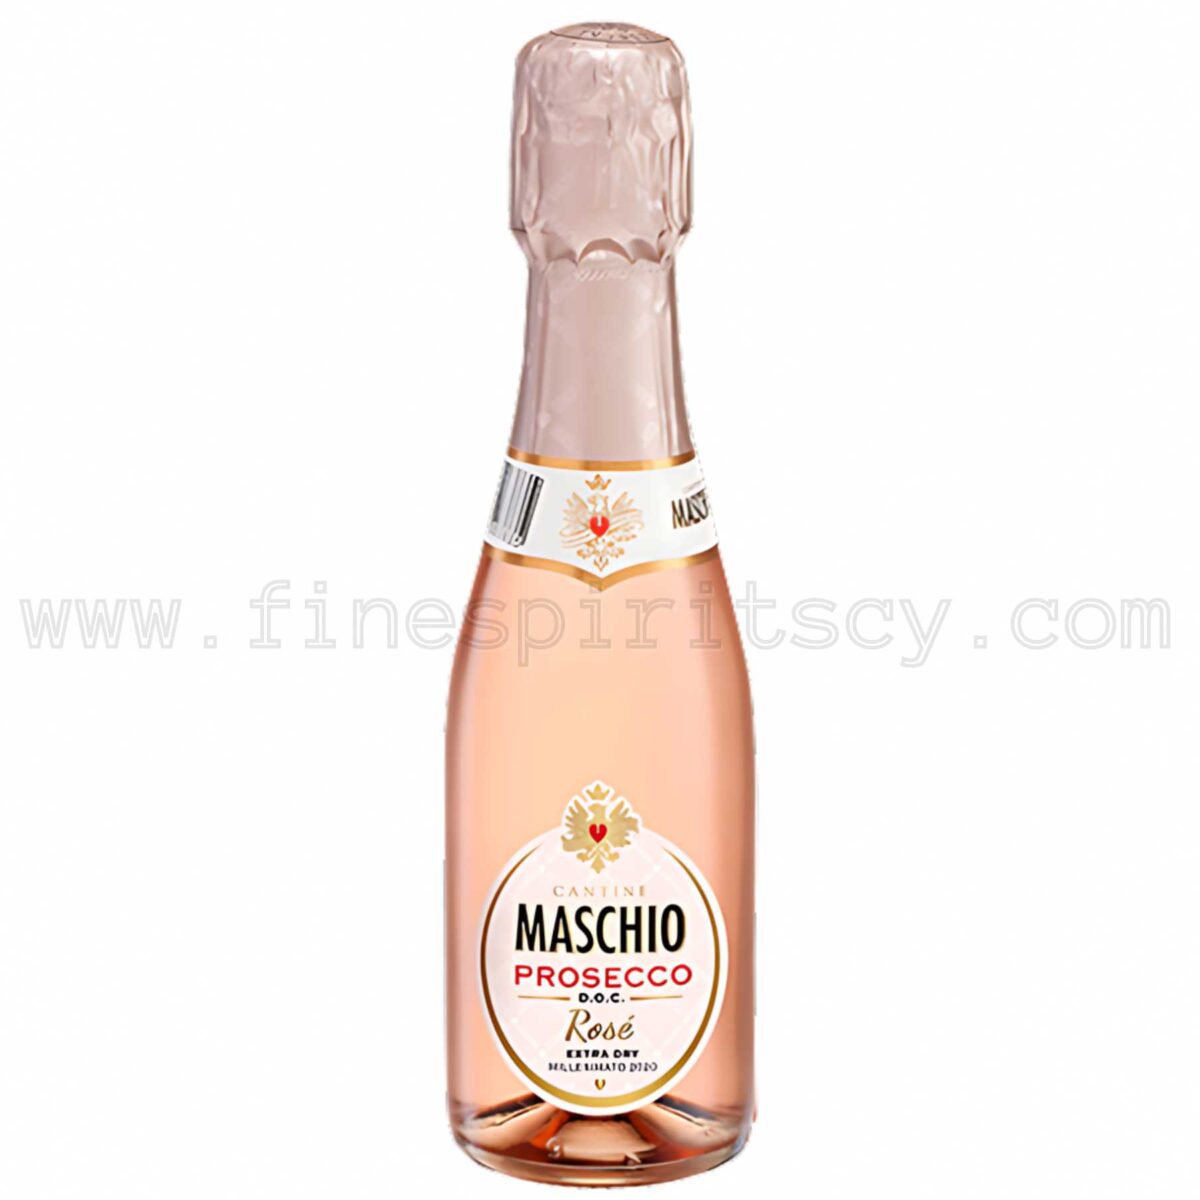 Maschio Prosecco Rose DOC 200ml 20cl 0.2L Price Cyprus Buy Pink Wine CY